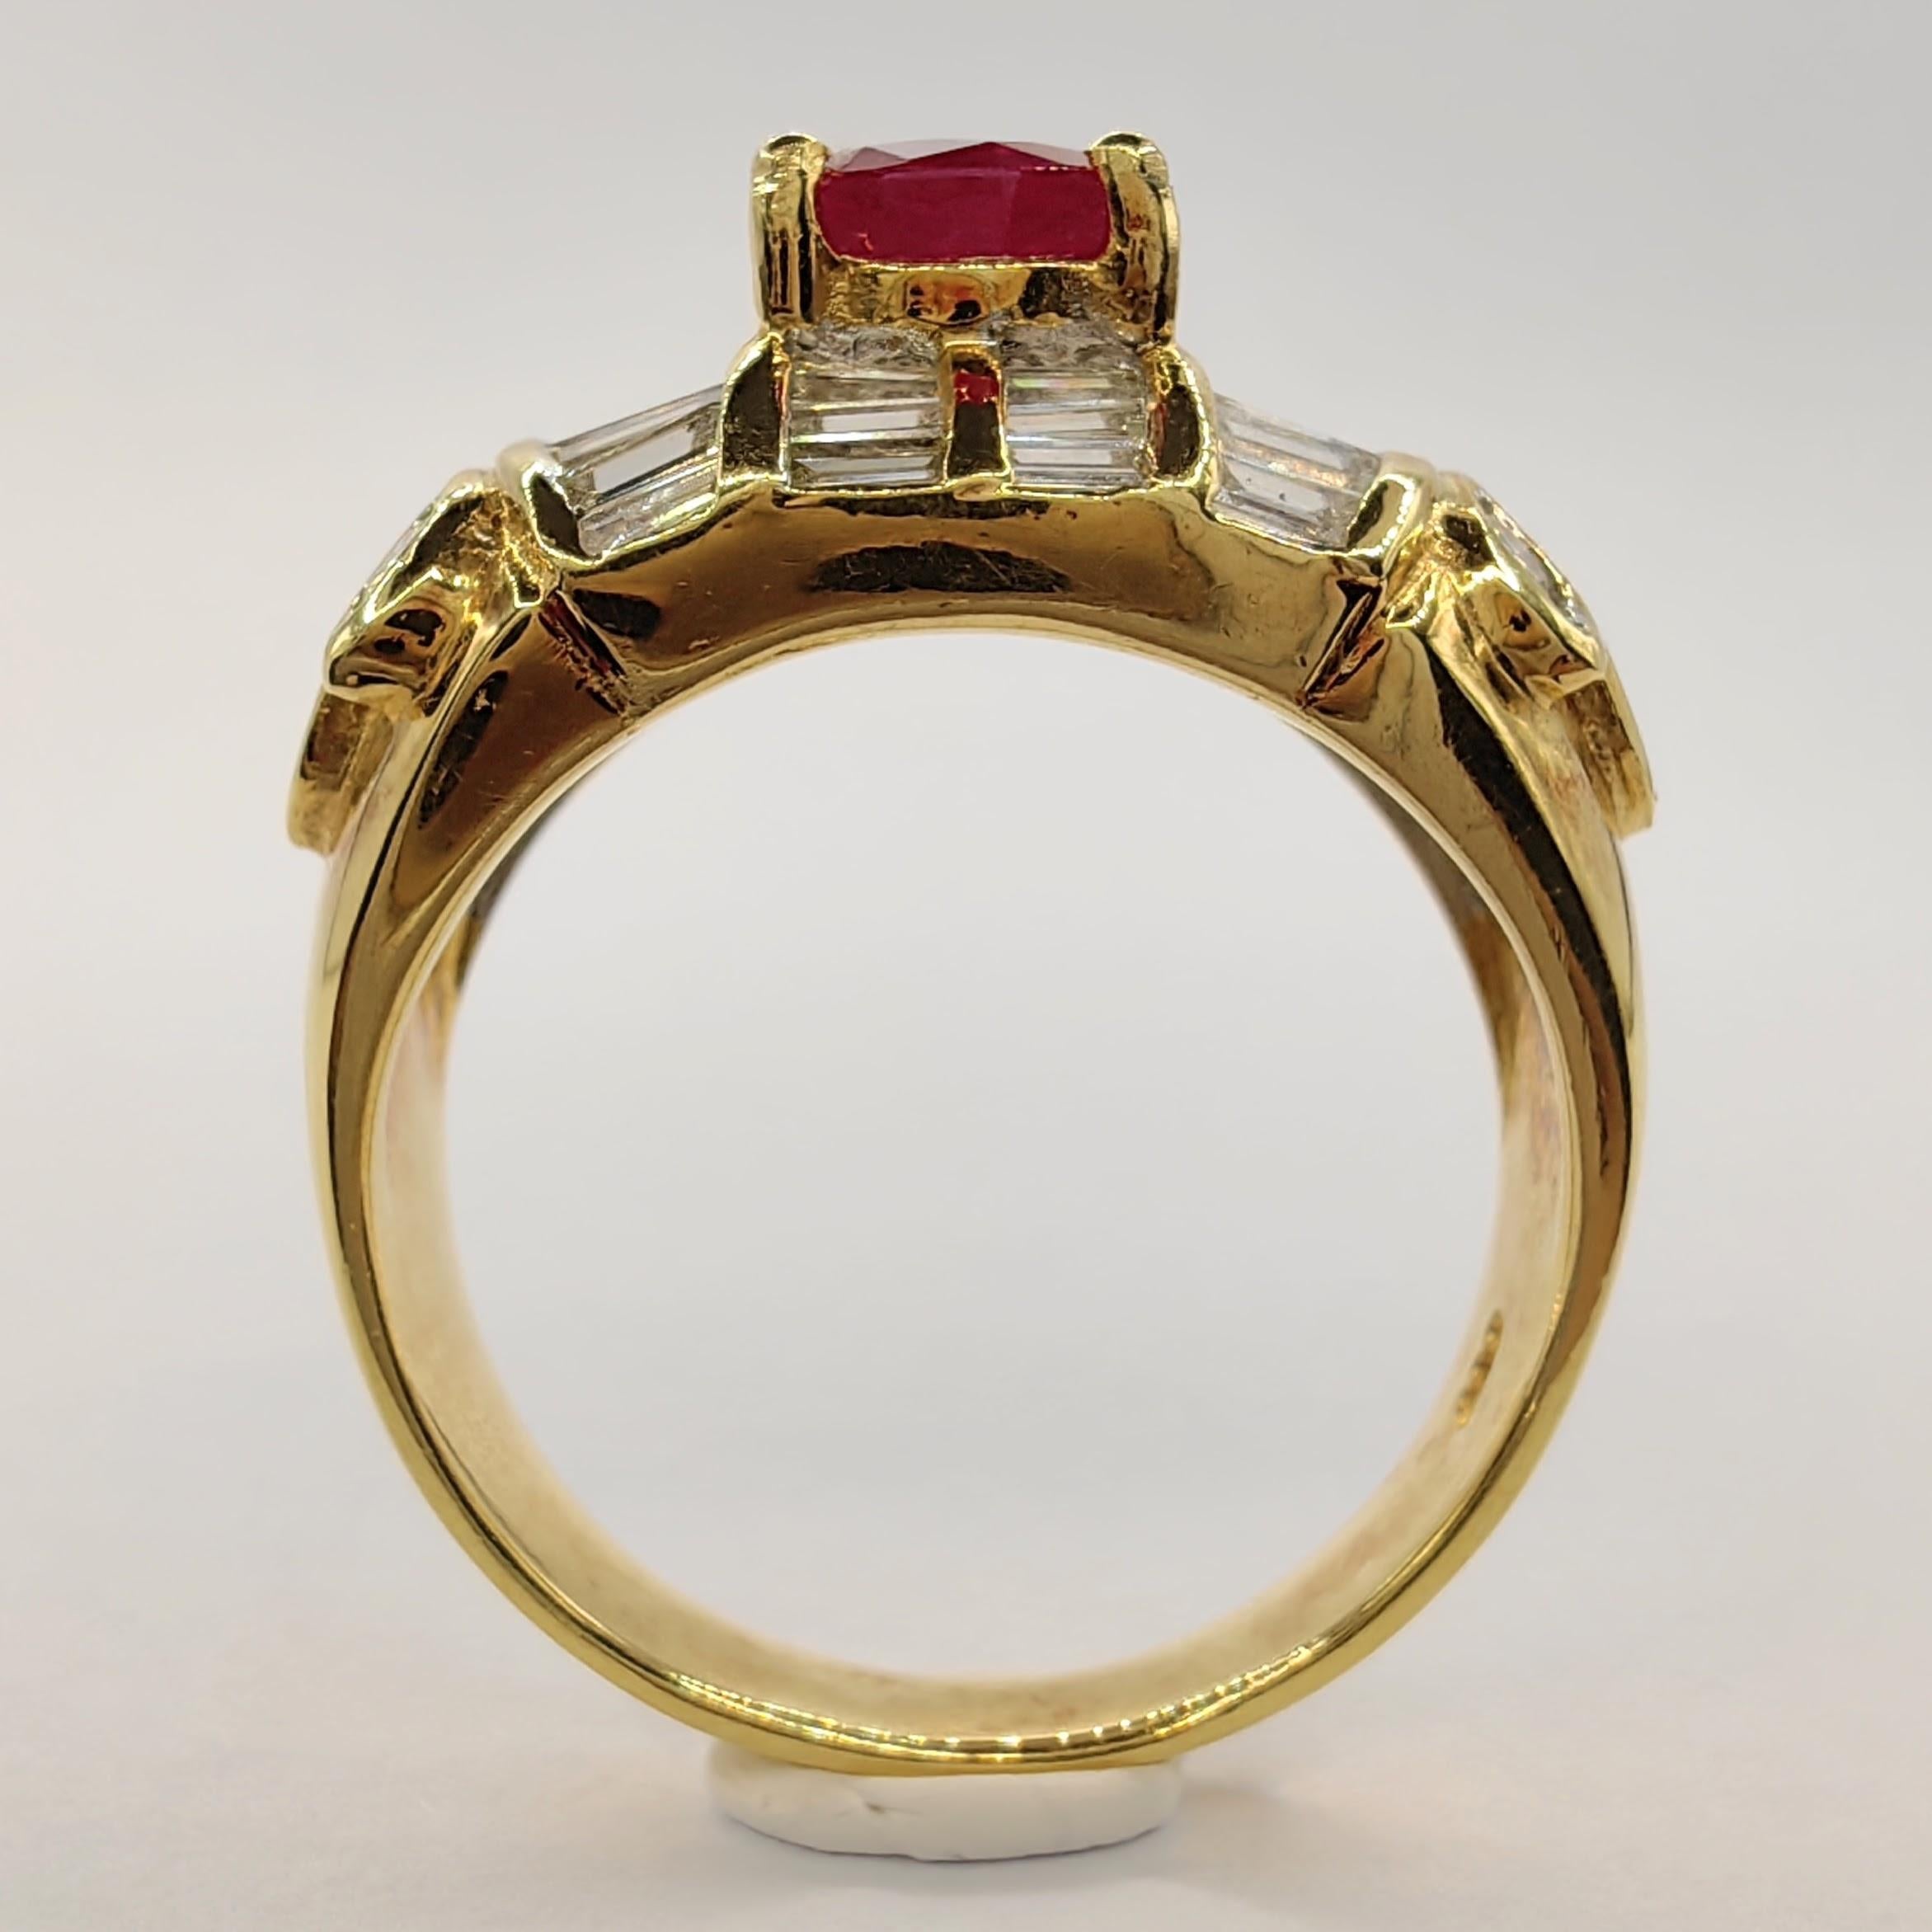 Vintage Art Deco Round-cut Ruby Tapered Baguette Diamond Ring in 20K Yellow Gold For Sale 1